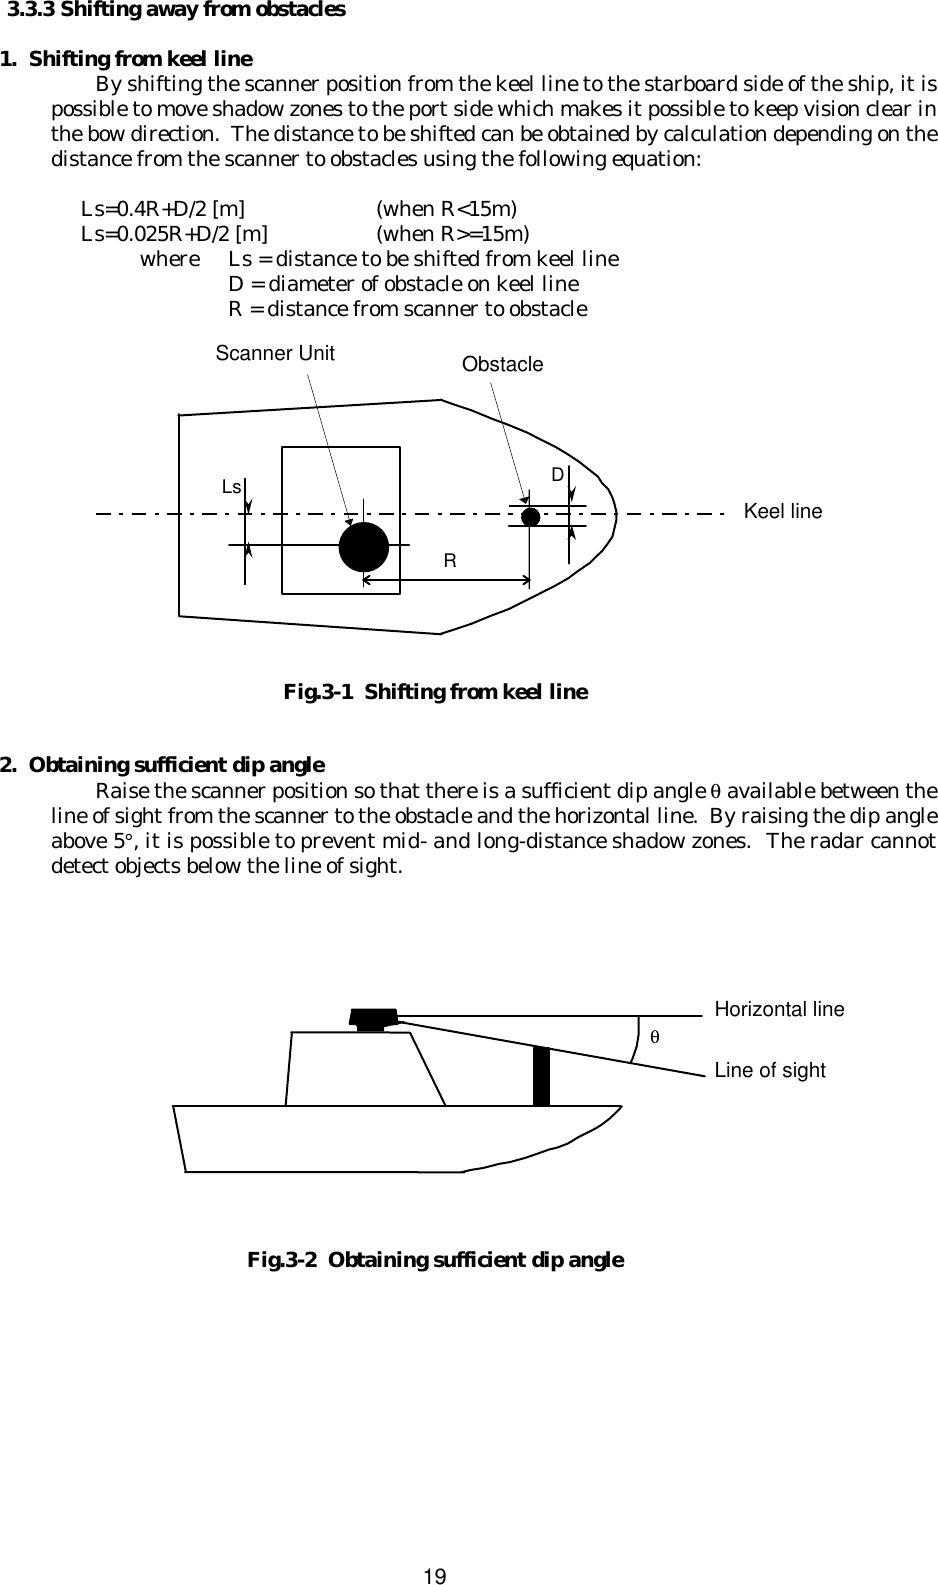  193.3.3 Shifting away from obstacles  1.  Shifting from keel line By shifting the scanner position from the keel line to the starboard side of the ship, it is possible to move shadow zones to the port side which makes it possible to keep vision clear in the bow direction.  The distance to be shifted can be obtained by calculation depending on the distance from the scanner to obstacles using the following equation:     Ls=0.4R+D/2 [m] (when R&lt;15m)  Ls=0.025R+D/2 [m] (when R&gt;=15m)  where Ls = distance to be shifted from keel line     D = diameter of obstacle on keel line     R = distance from scanner to obstacle              Fig.3-1  Shifting from keel line   2.  Obtaining sufficient dip angle Raise the scanner position so that there is a sufficient dip angle θ available between the line of sight from the scanner to the obstacle and the horizontal line.  By raising the dip angle above 5°, it is possible to prevent mid- and long-distance shadow zones.  The radar cannot detect objects below the line of sight.               Fig.3-2  Obtaining sufficient dip angle    Ls R D Scanner Unit Obstacle Keel line Horizontal line Line of sight θ 